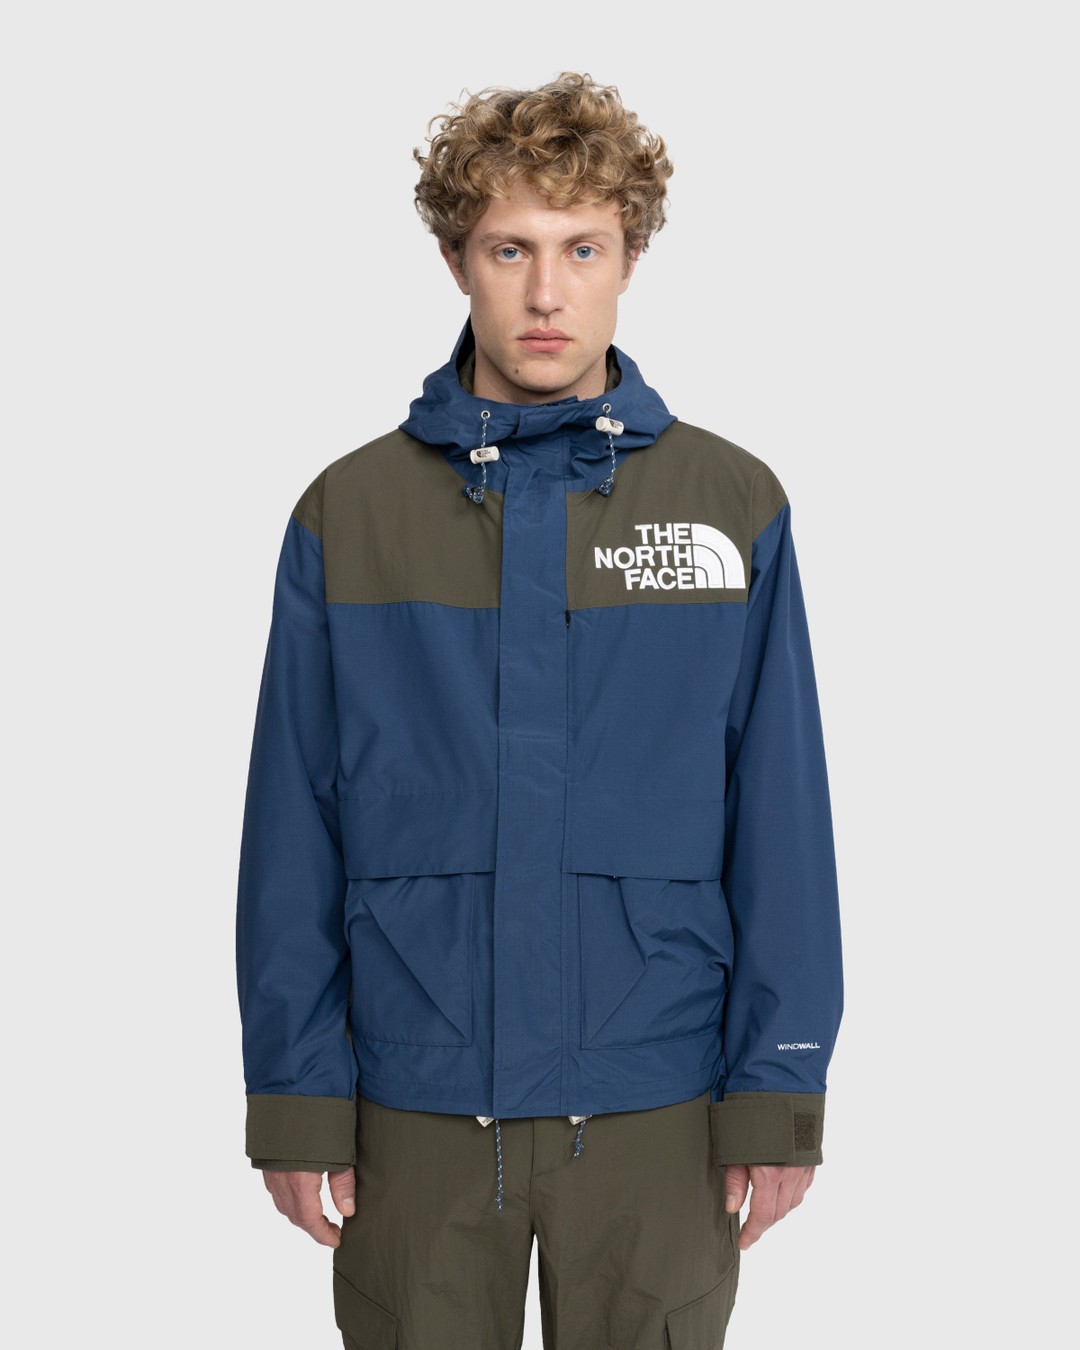 The North Face – ‘86 Low-Fi Hi-Tek Mountain Jacket Shady Blue/New Taupe Green - Windbreakers - Blue - Image 2